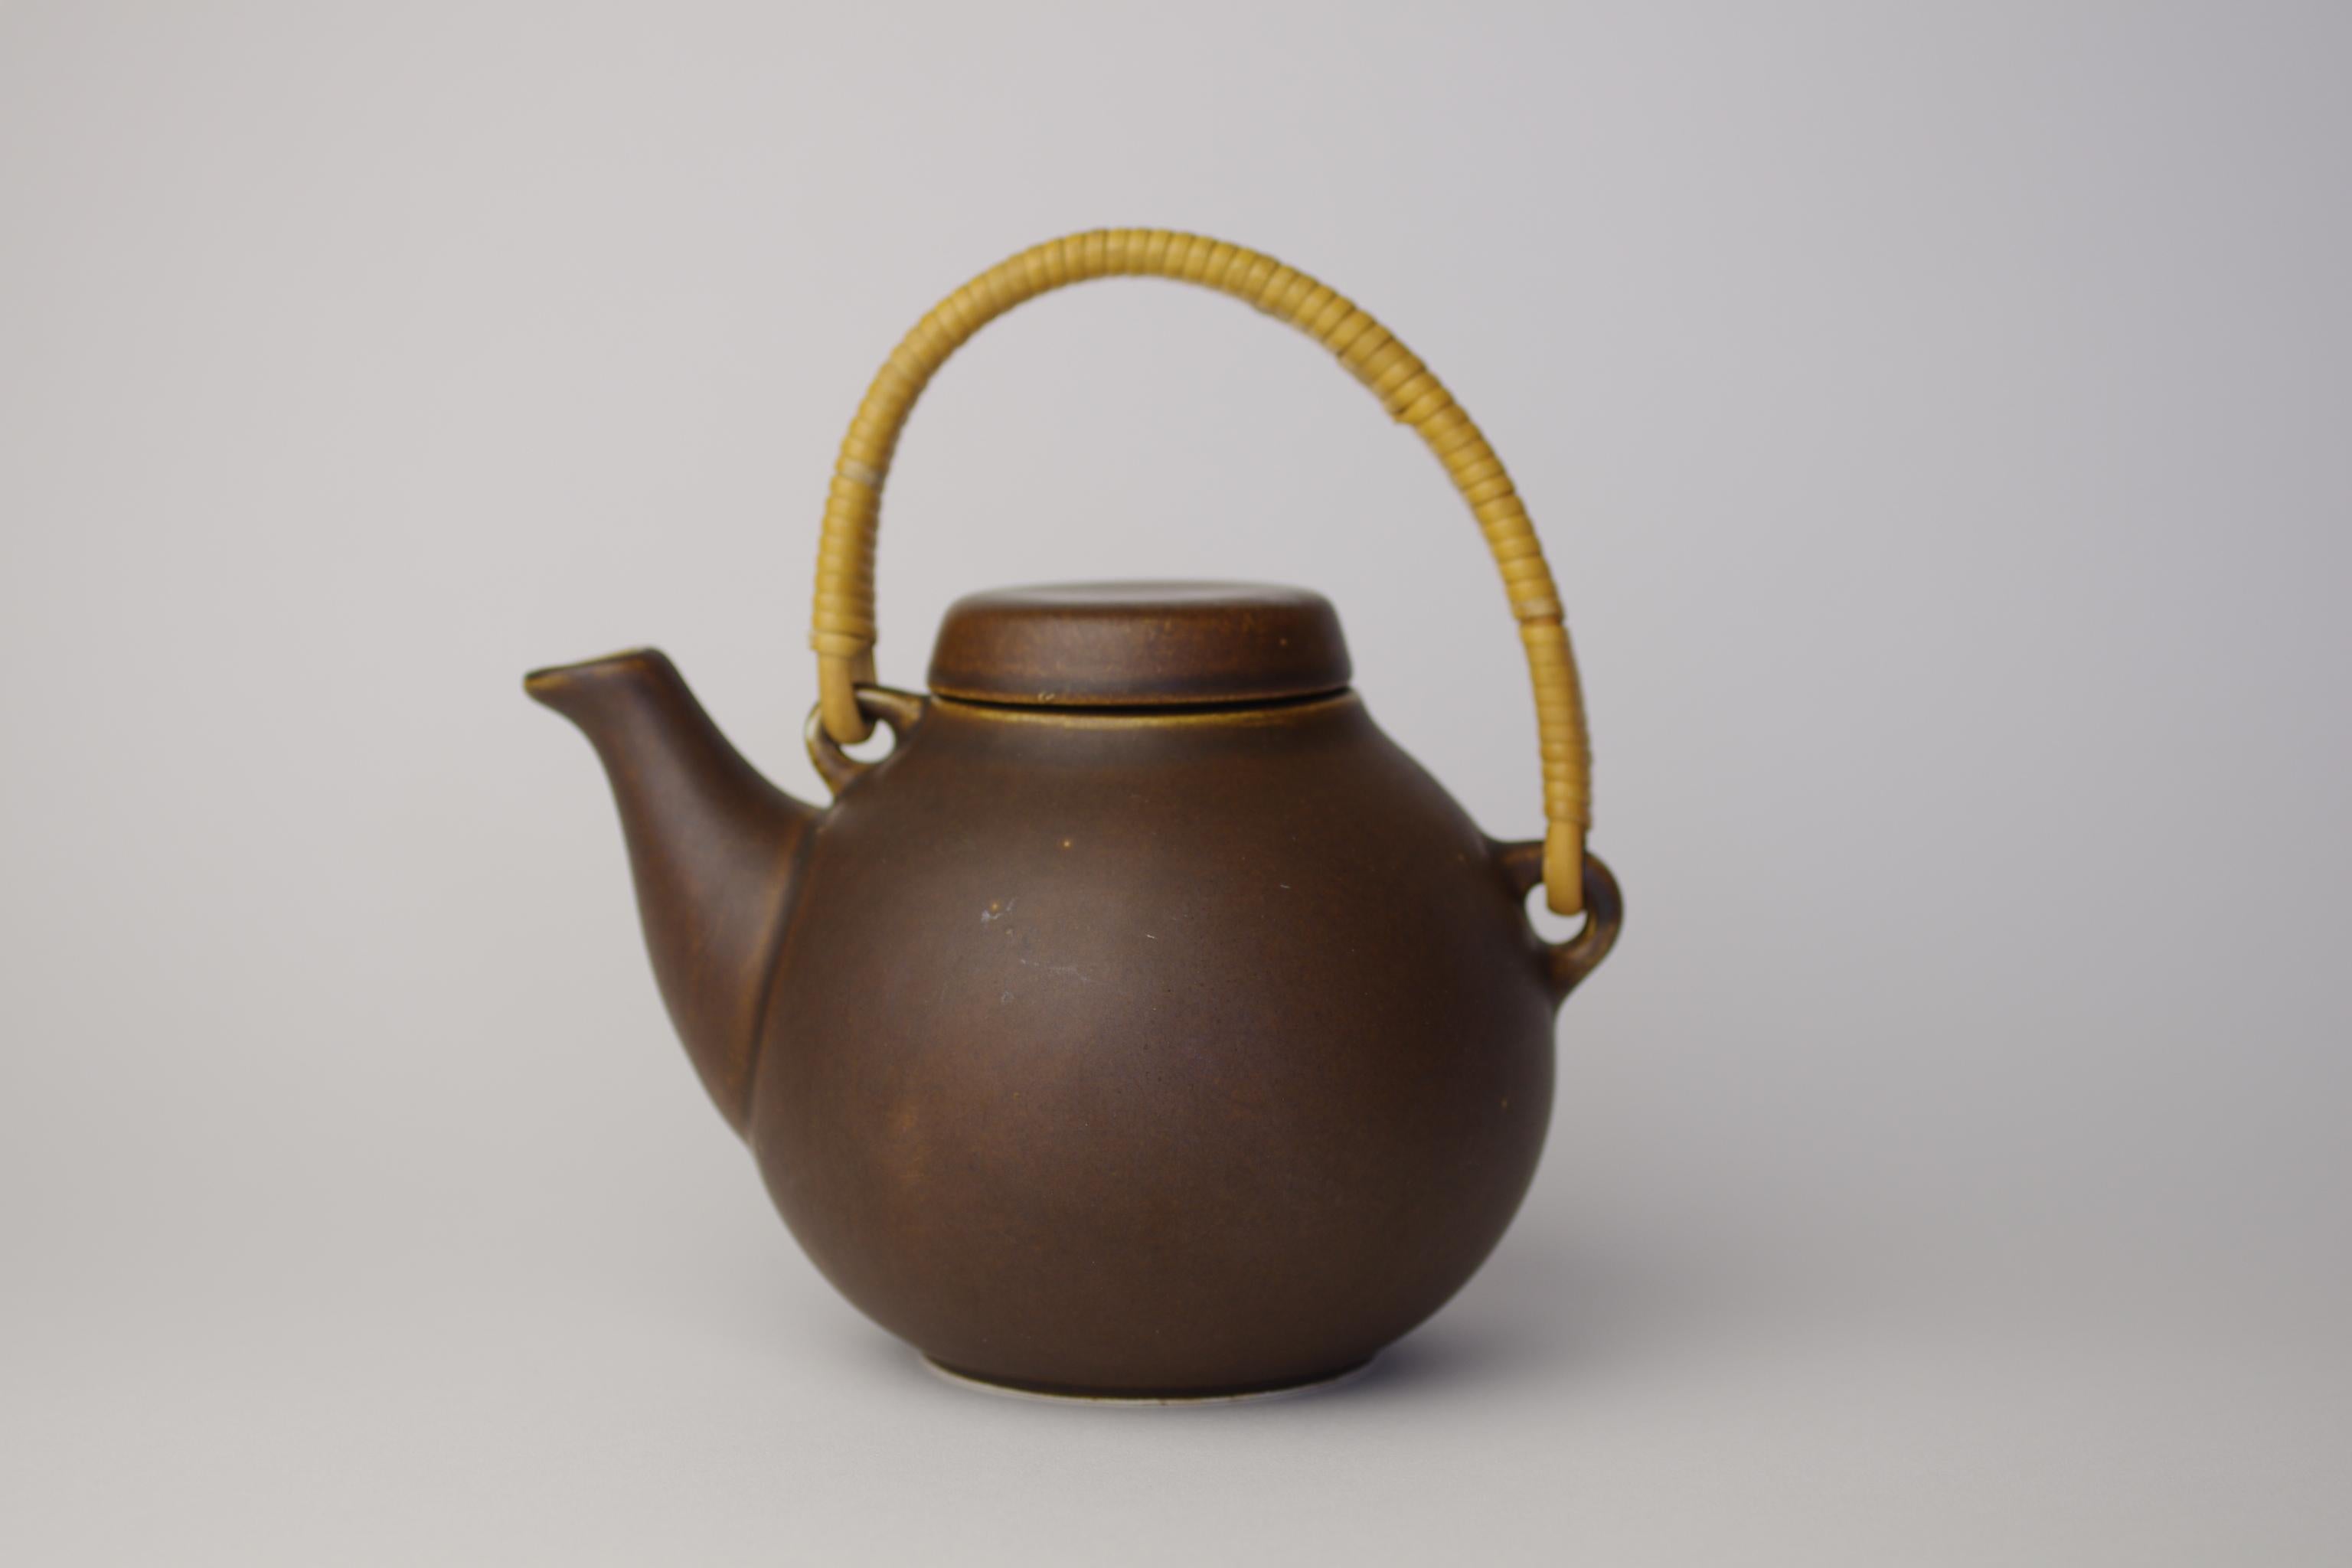 Product Description:
The teapot on offer here has been designed by Ulla Procopé for Arabia. Ulla, who died young at an age of 47, is responsable for a whole series of famous designs at Arabia. Ulla Procopé was the designer of the posthumously